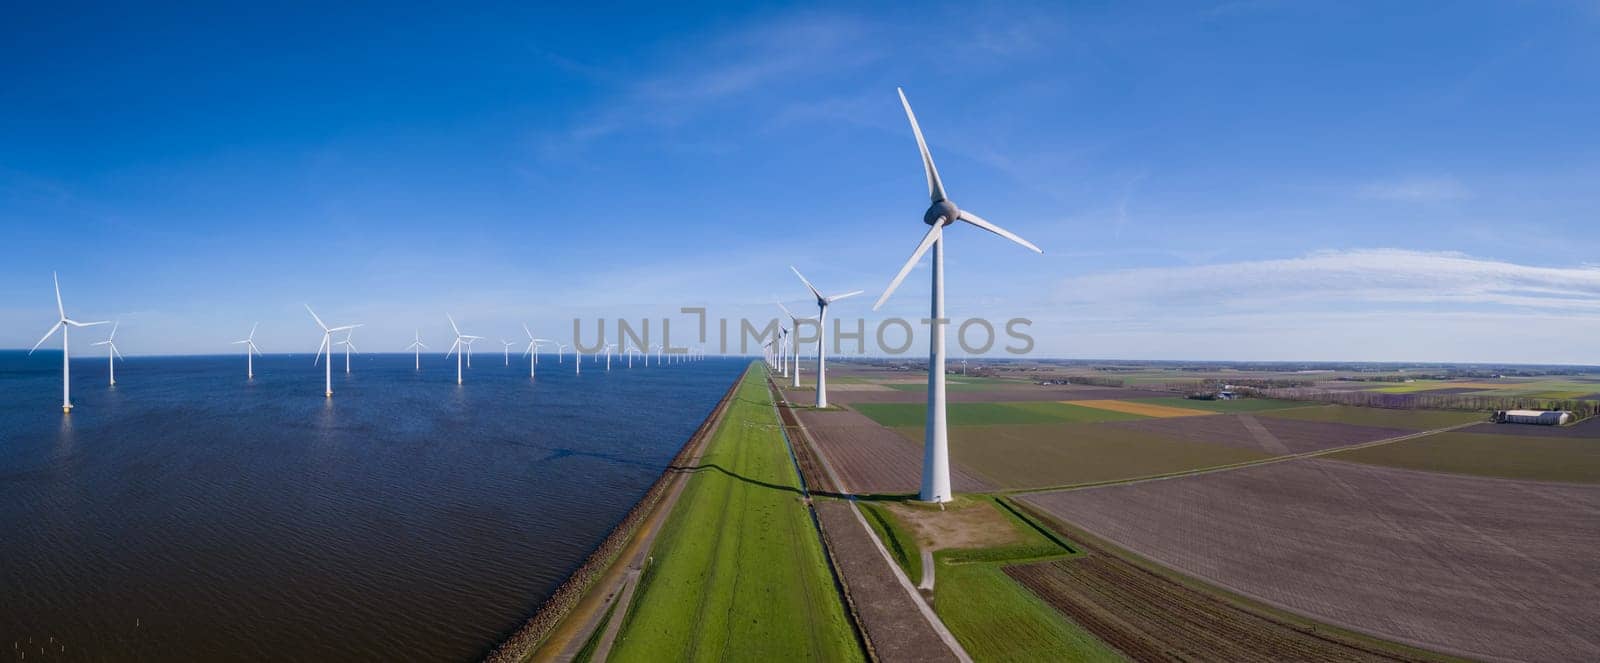 A stunning view of a row of wind turbines in Flevoland, Netherlands during Spring by fokkebok